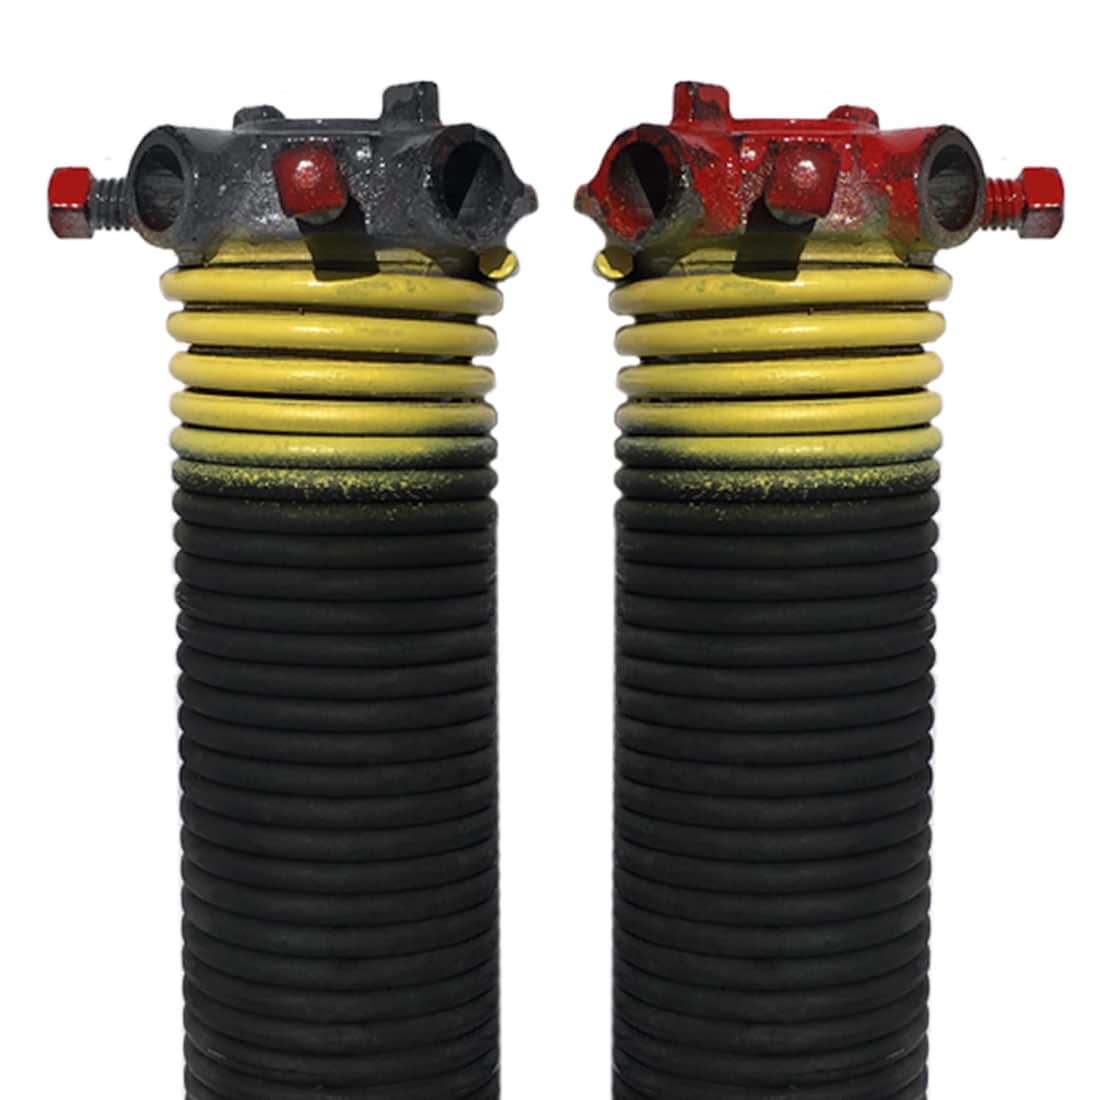 DURA-LIFT 0.207 x 2 Left and Right Wound 2-Pack Yellow Steel